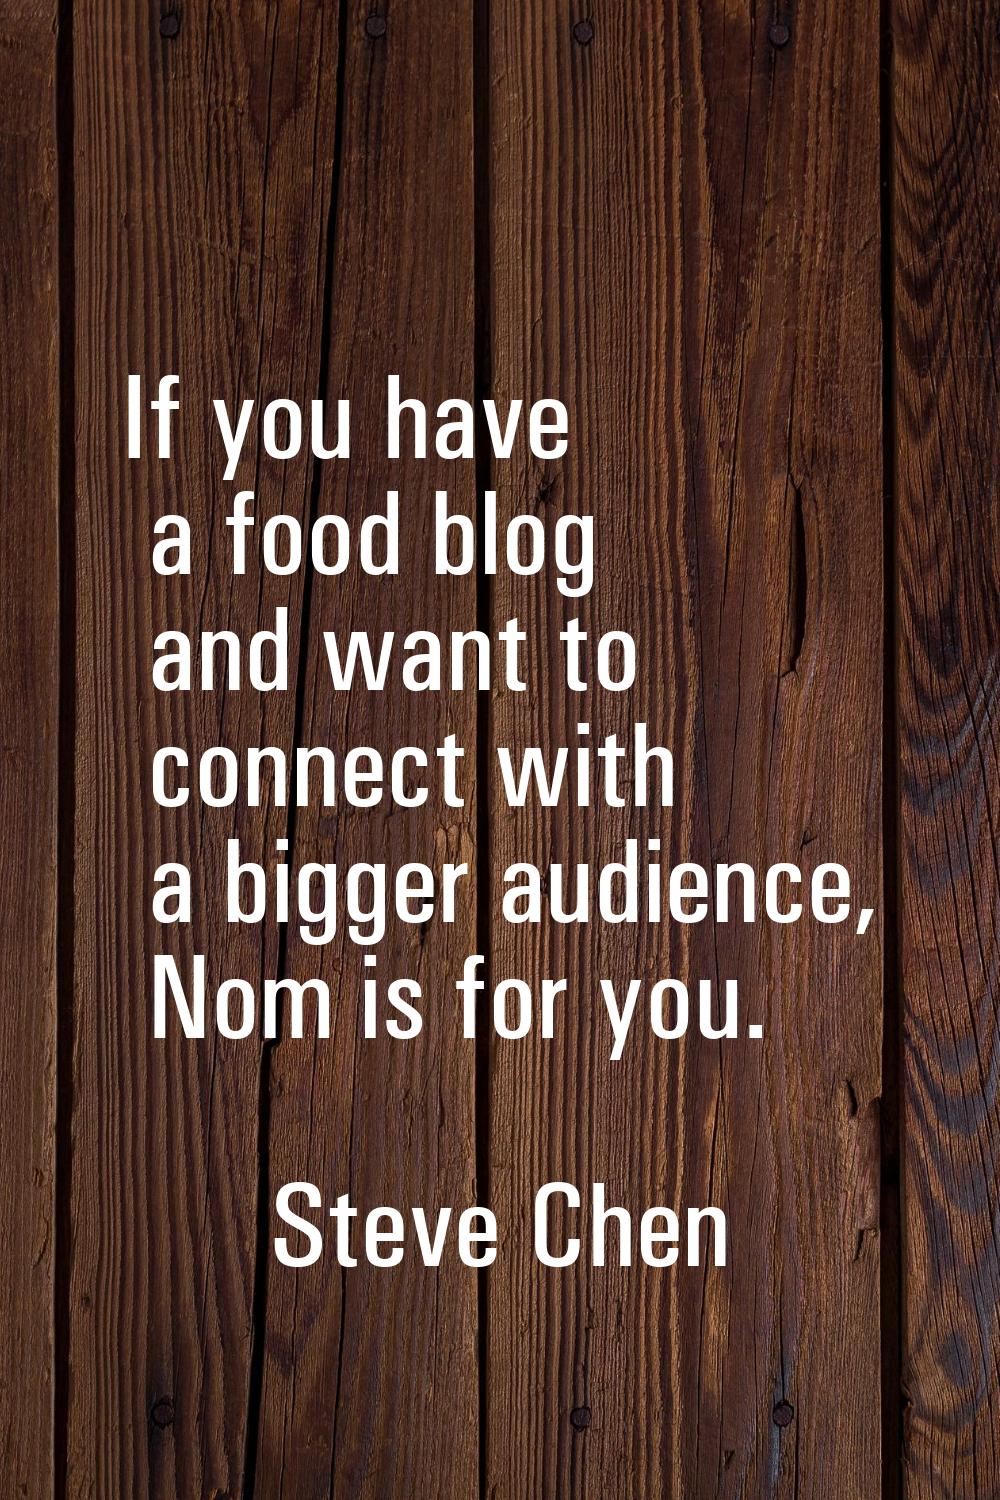 If you have a food blog and want to connect with a bigger audience, Nom is for you.